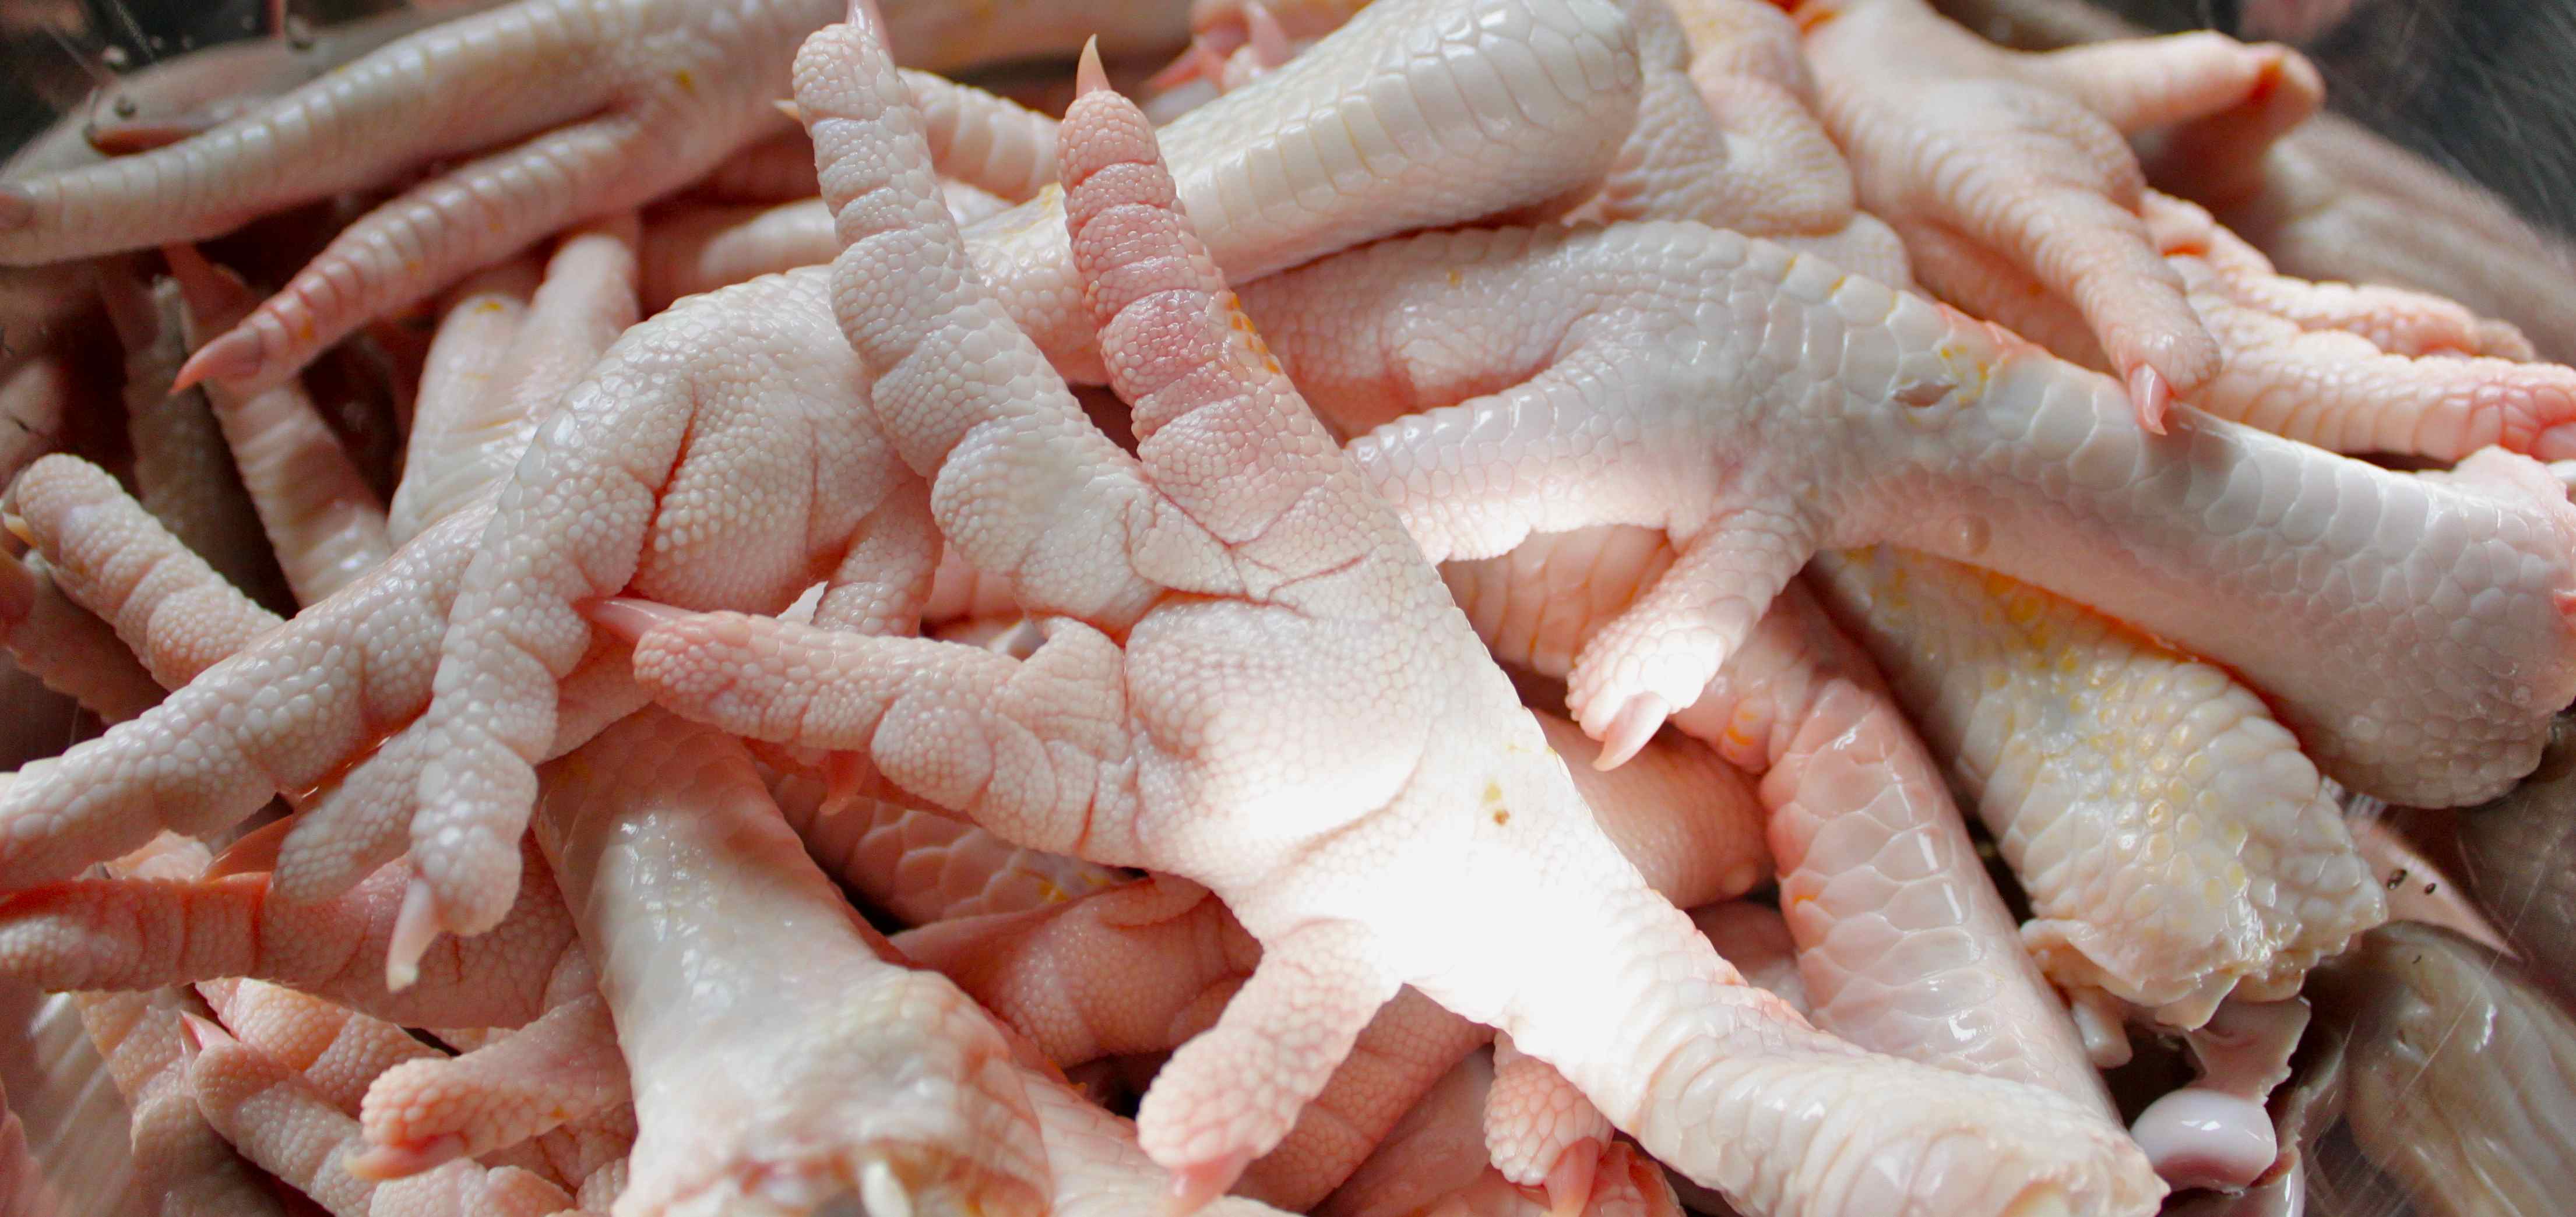 Grade A Chicken Feet And Other Parts For Sale